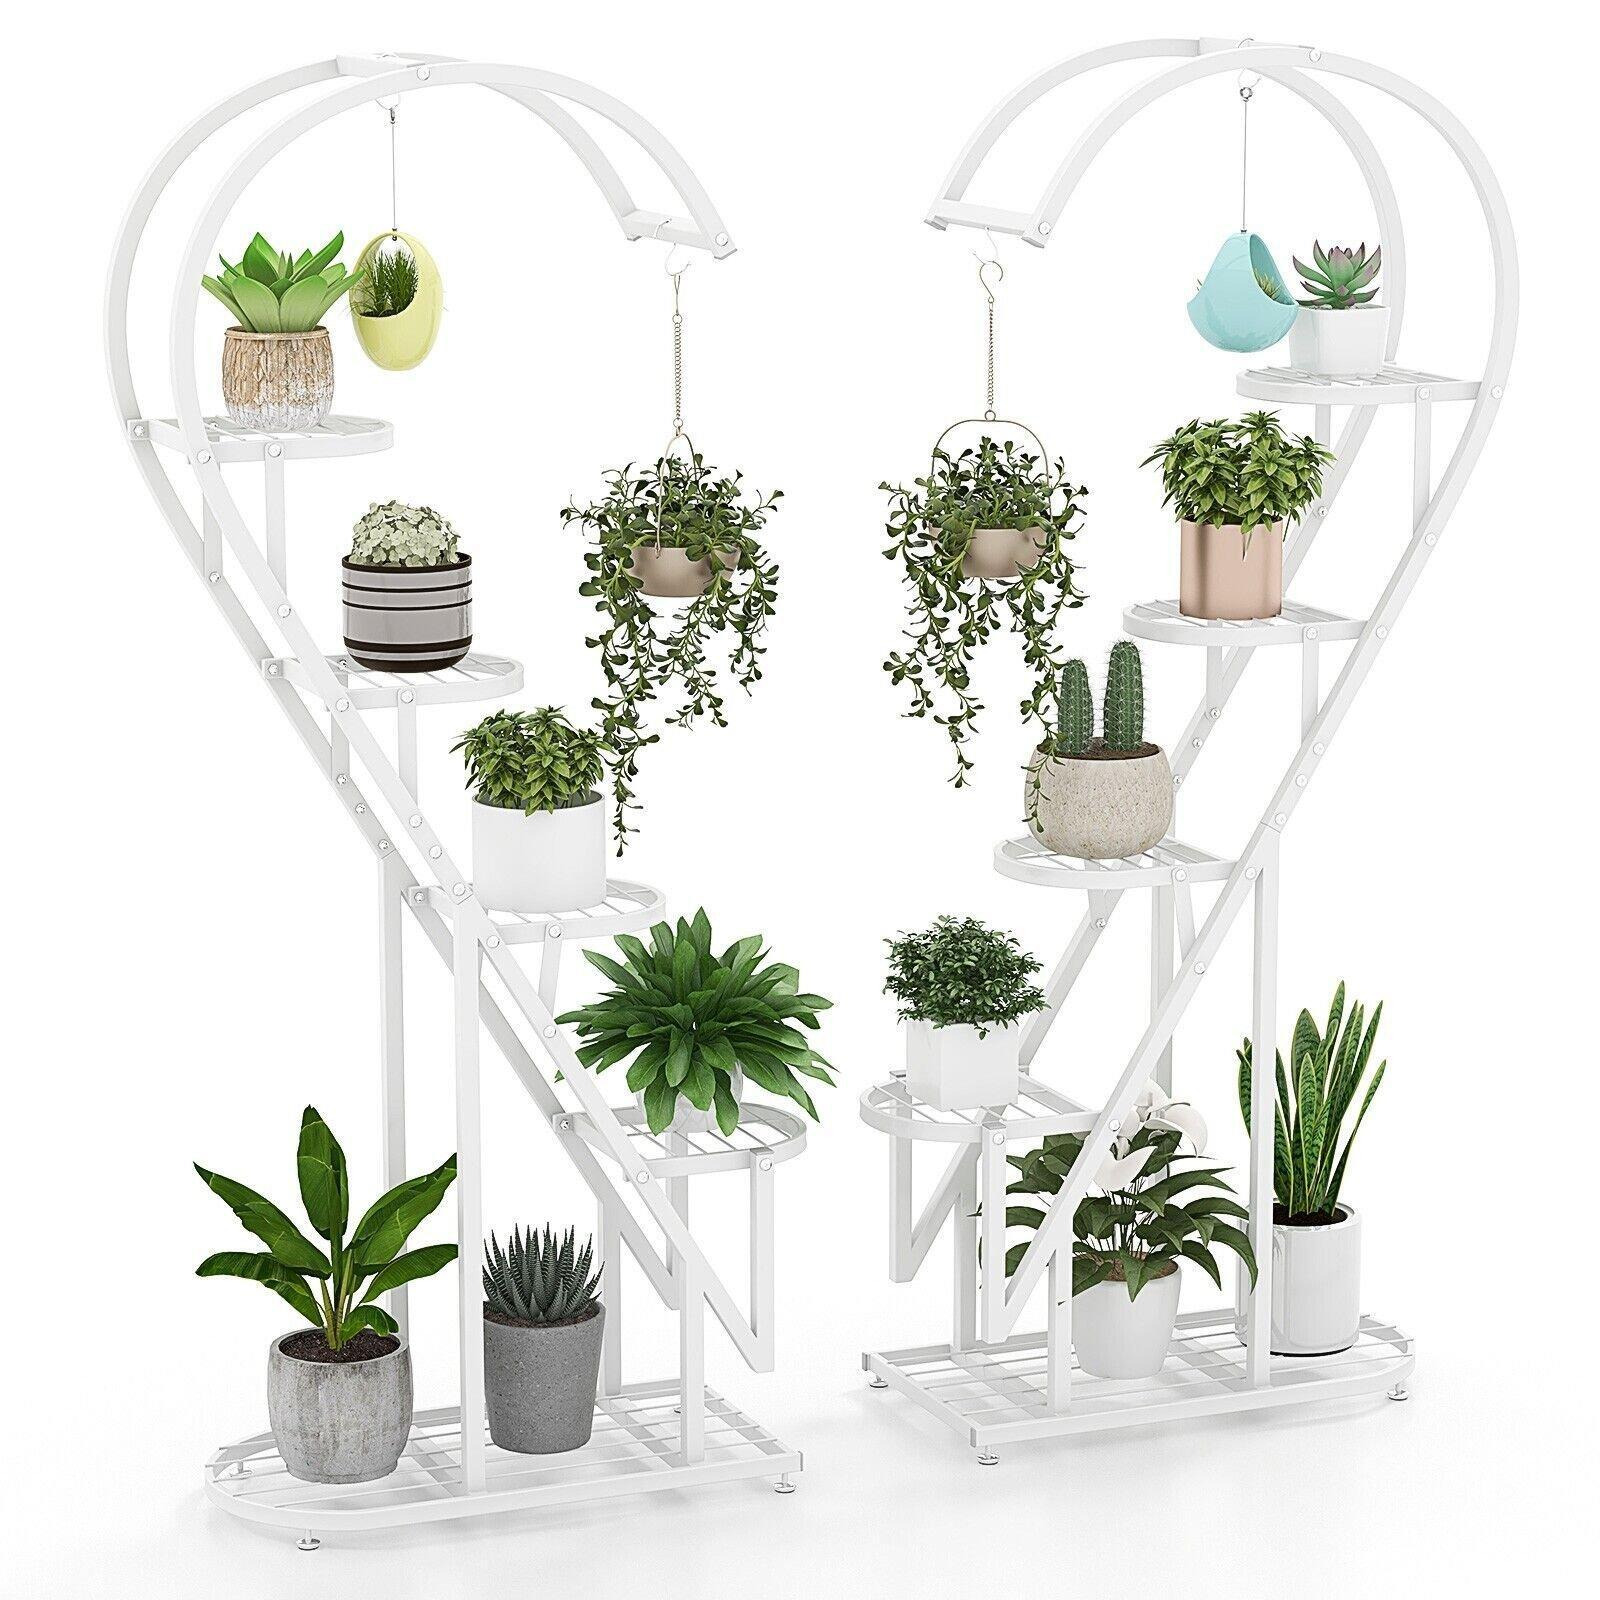 5 Tier Metal Plant Stand Heart-shaped Ladder Plant Shelf w/Hanging Hook - image 1